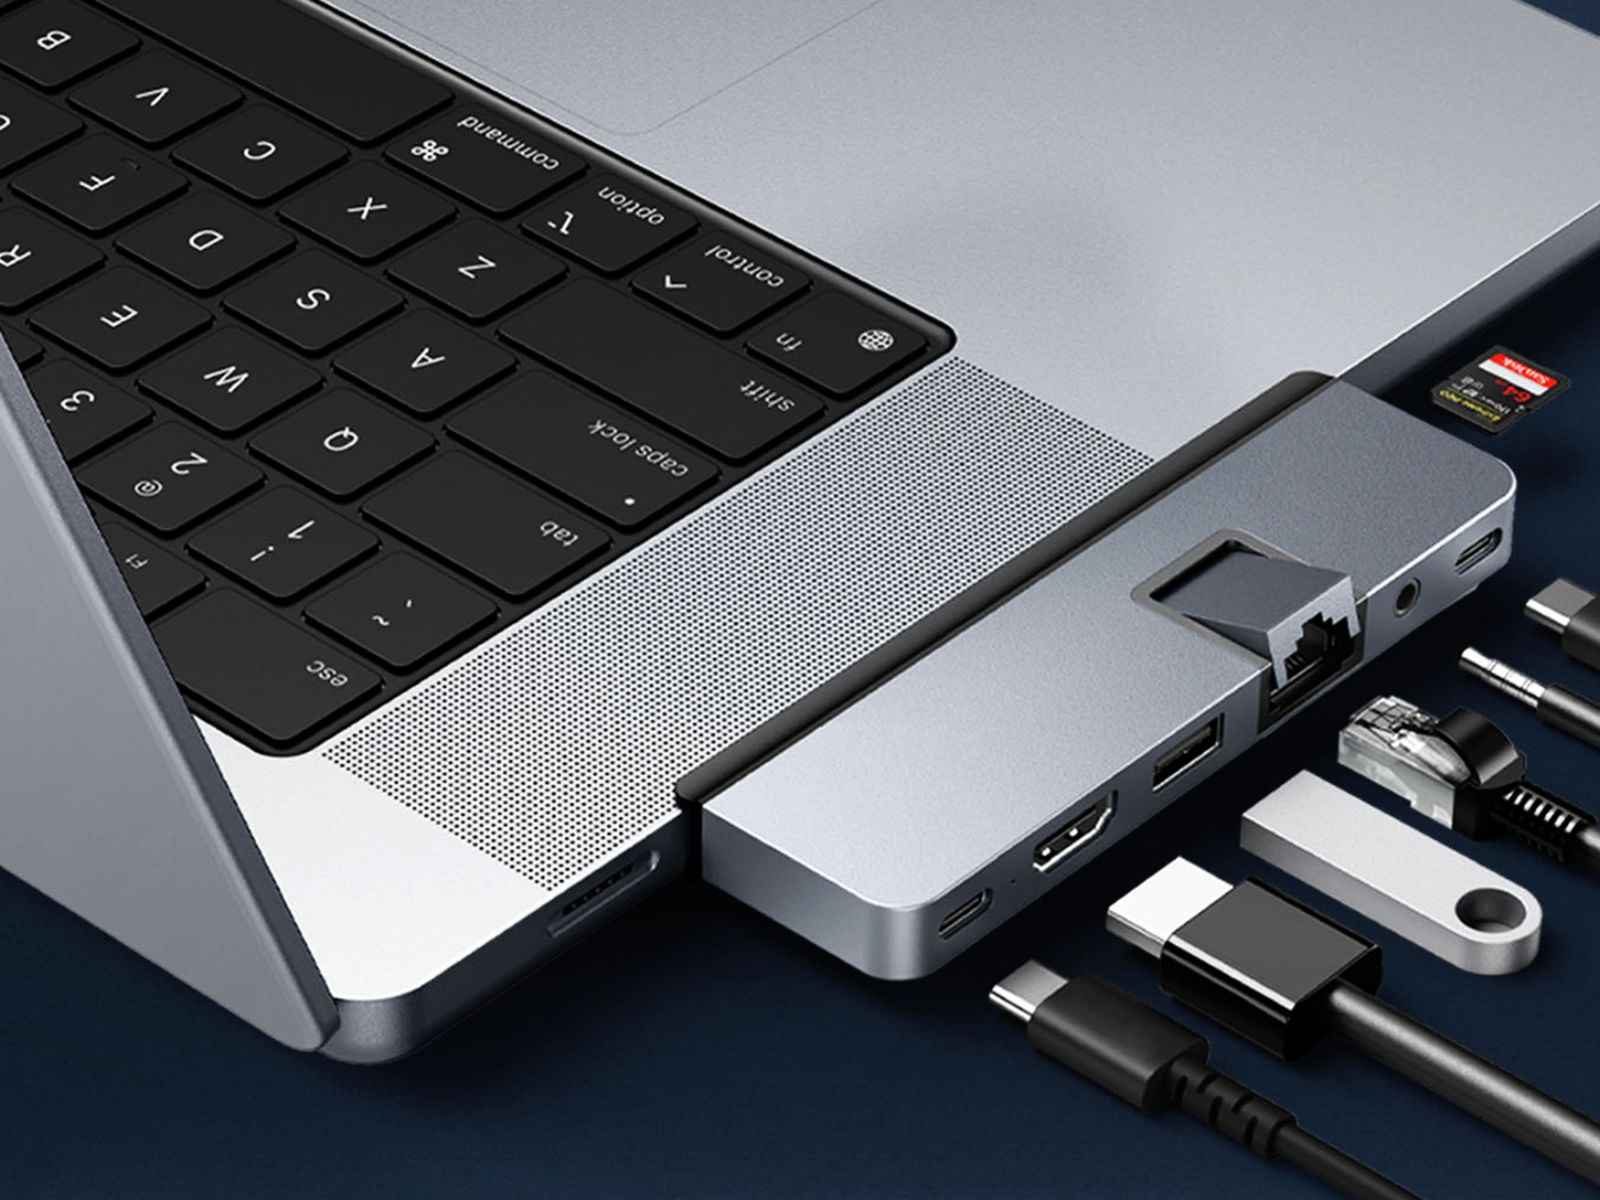 HyperDrive Dual 4K HDMI 10-in-1 USB-C Hub For M1, M2, and M3 MacBooks –